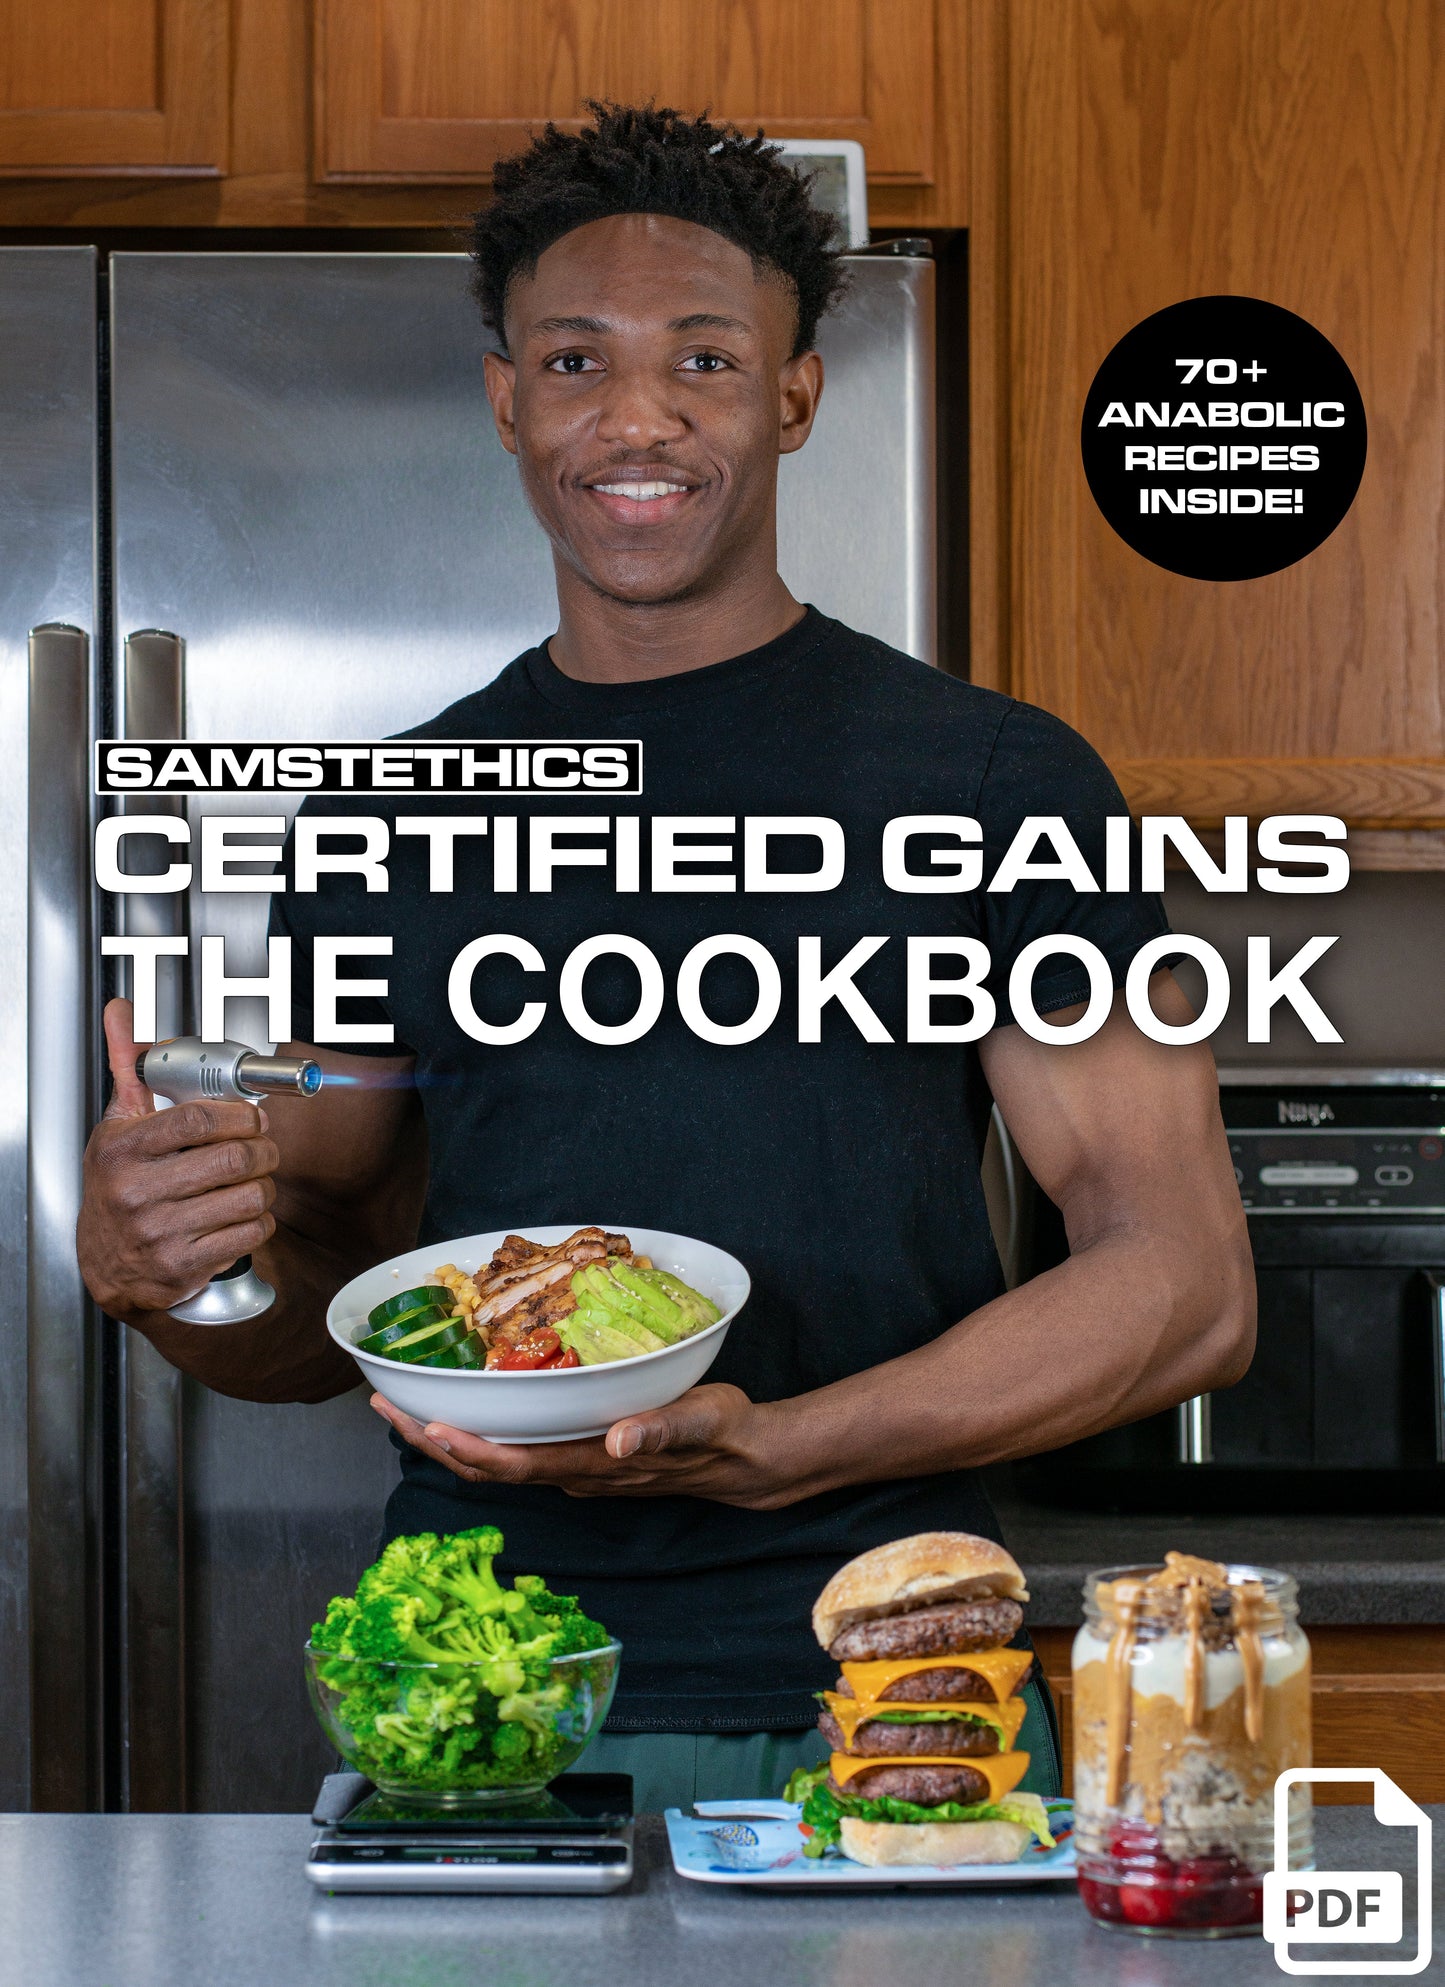 CERTIFIED GAINS THE COOKBOOK